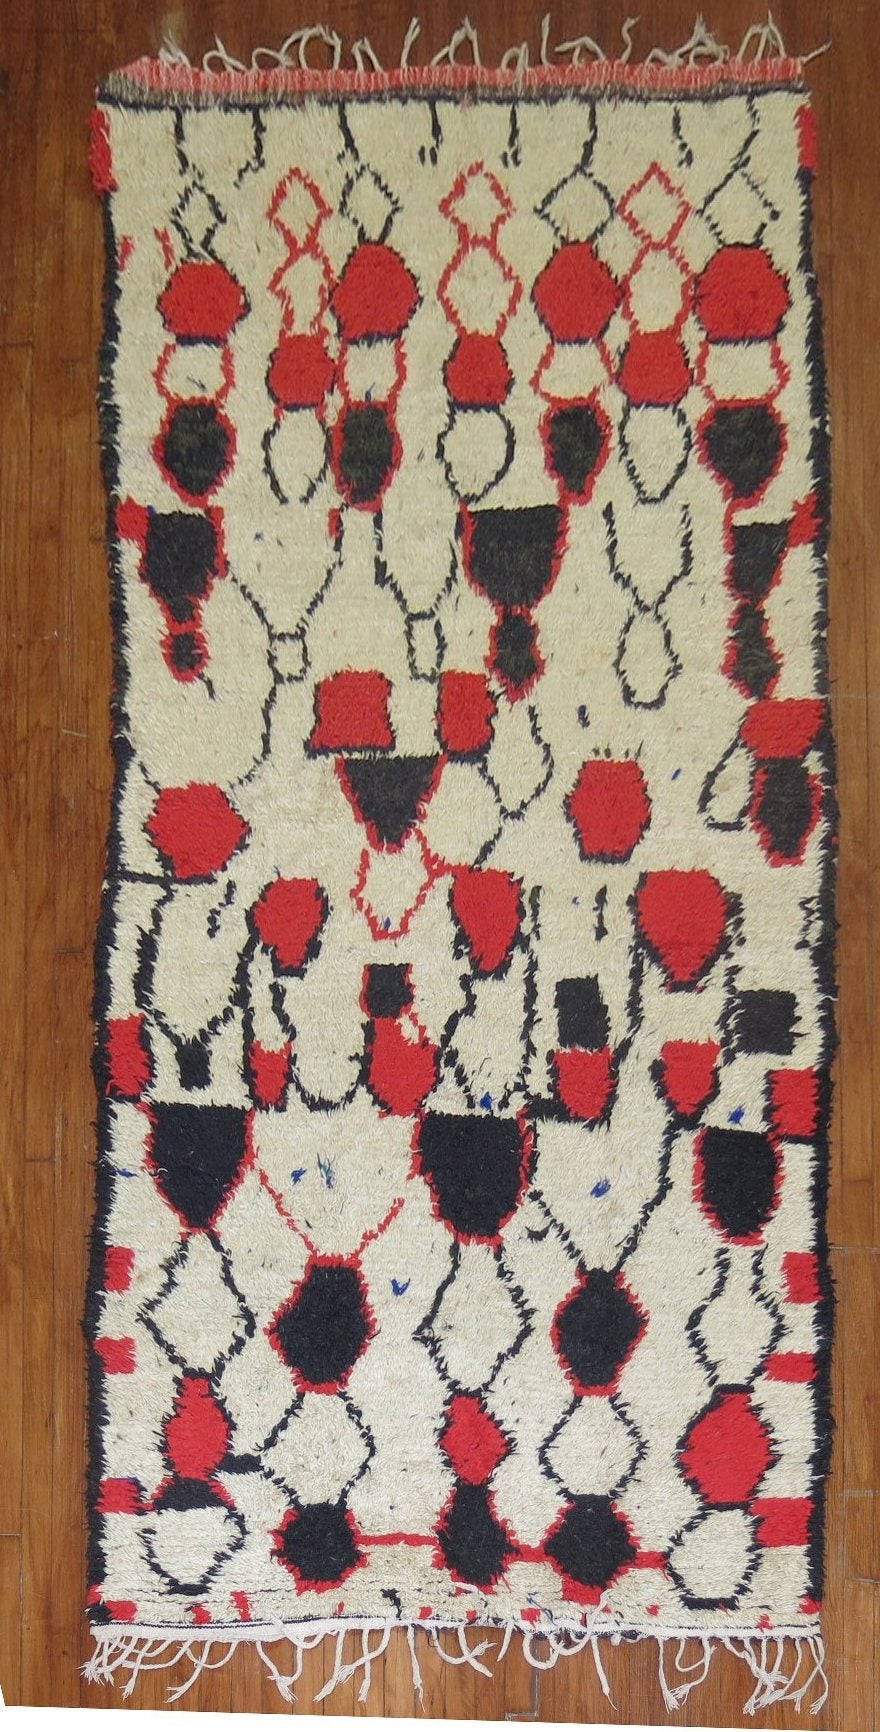 A one-of-a-kind Authentic Moroccan runner from the middle of the 20th century. This piece is pretty wild and fun. If you are in love take a dive and make a big splash!

size 4' 6